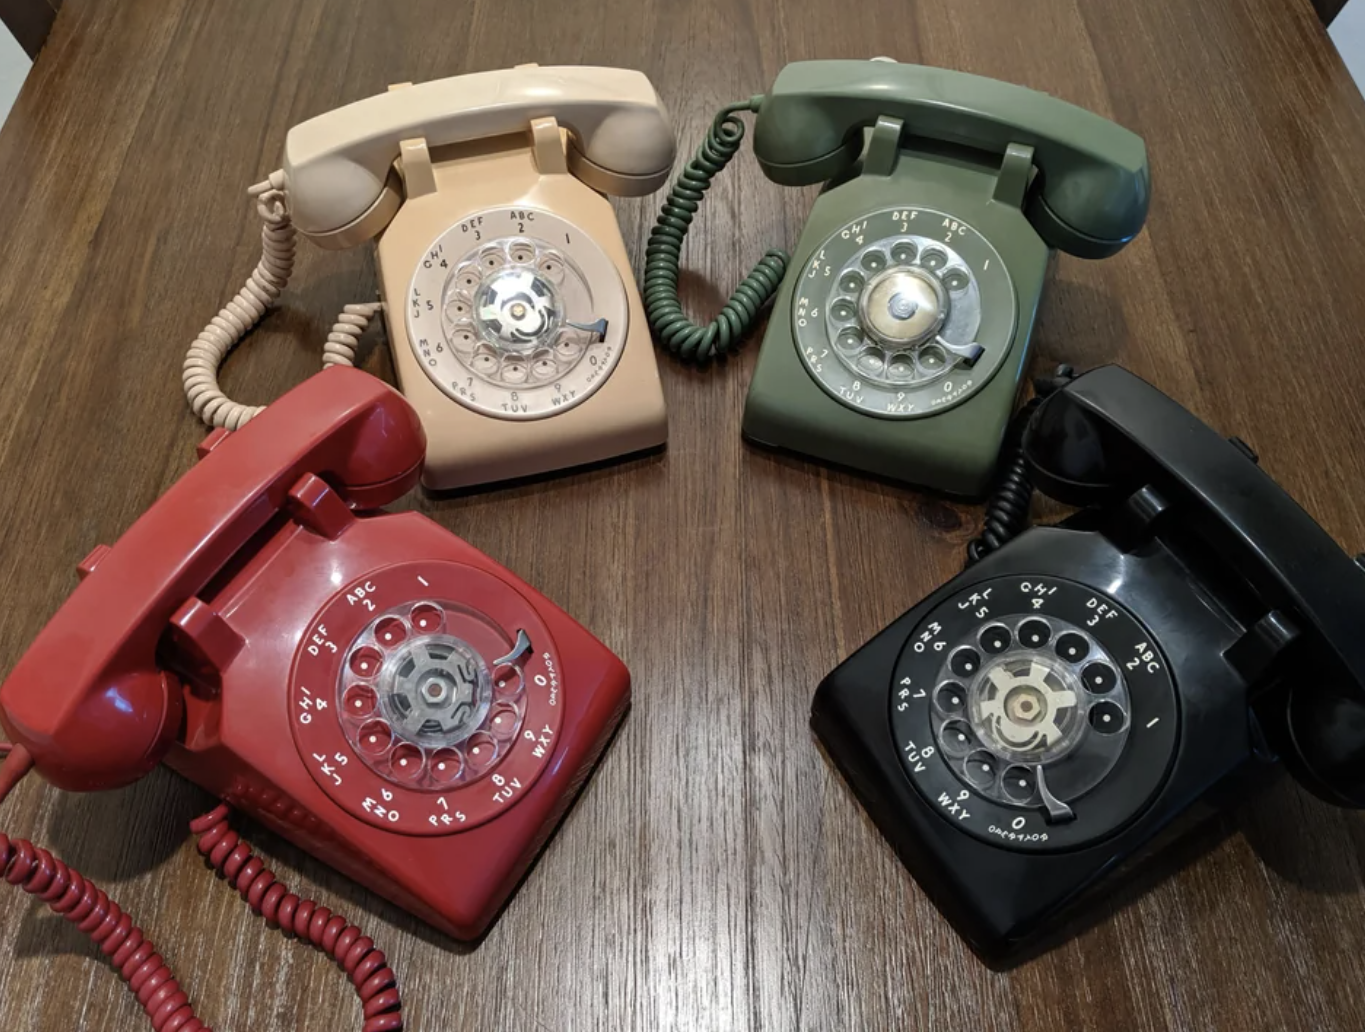 Four old-fashioned phones are sitting on a table